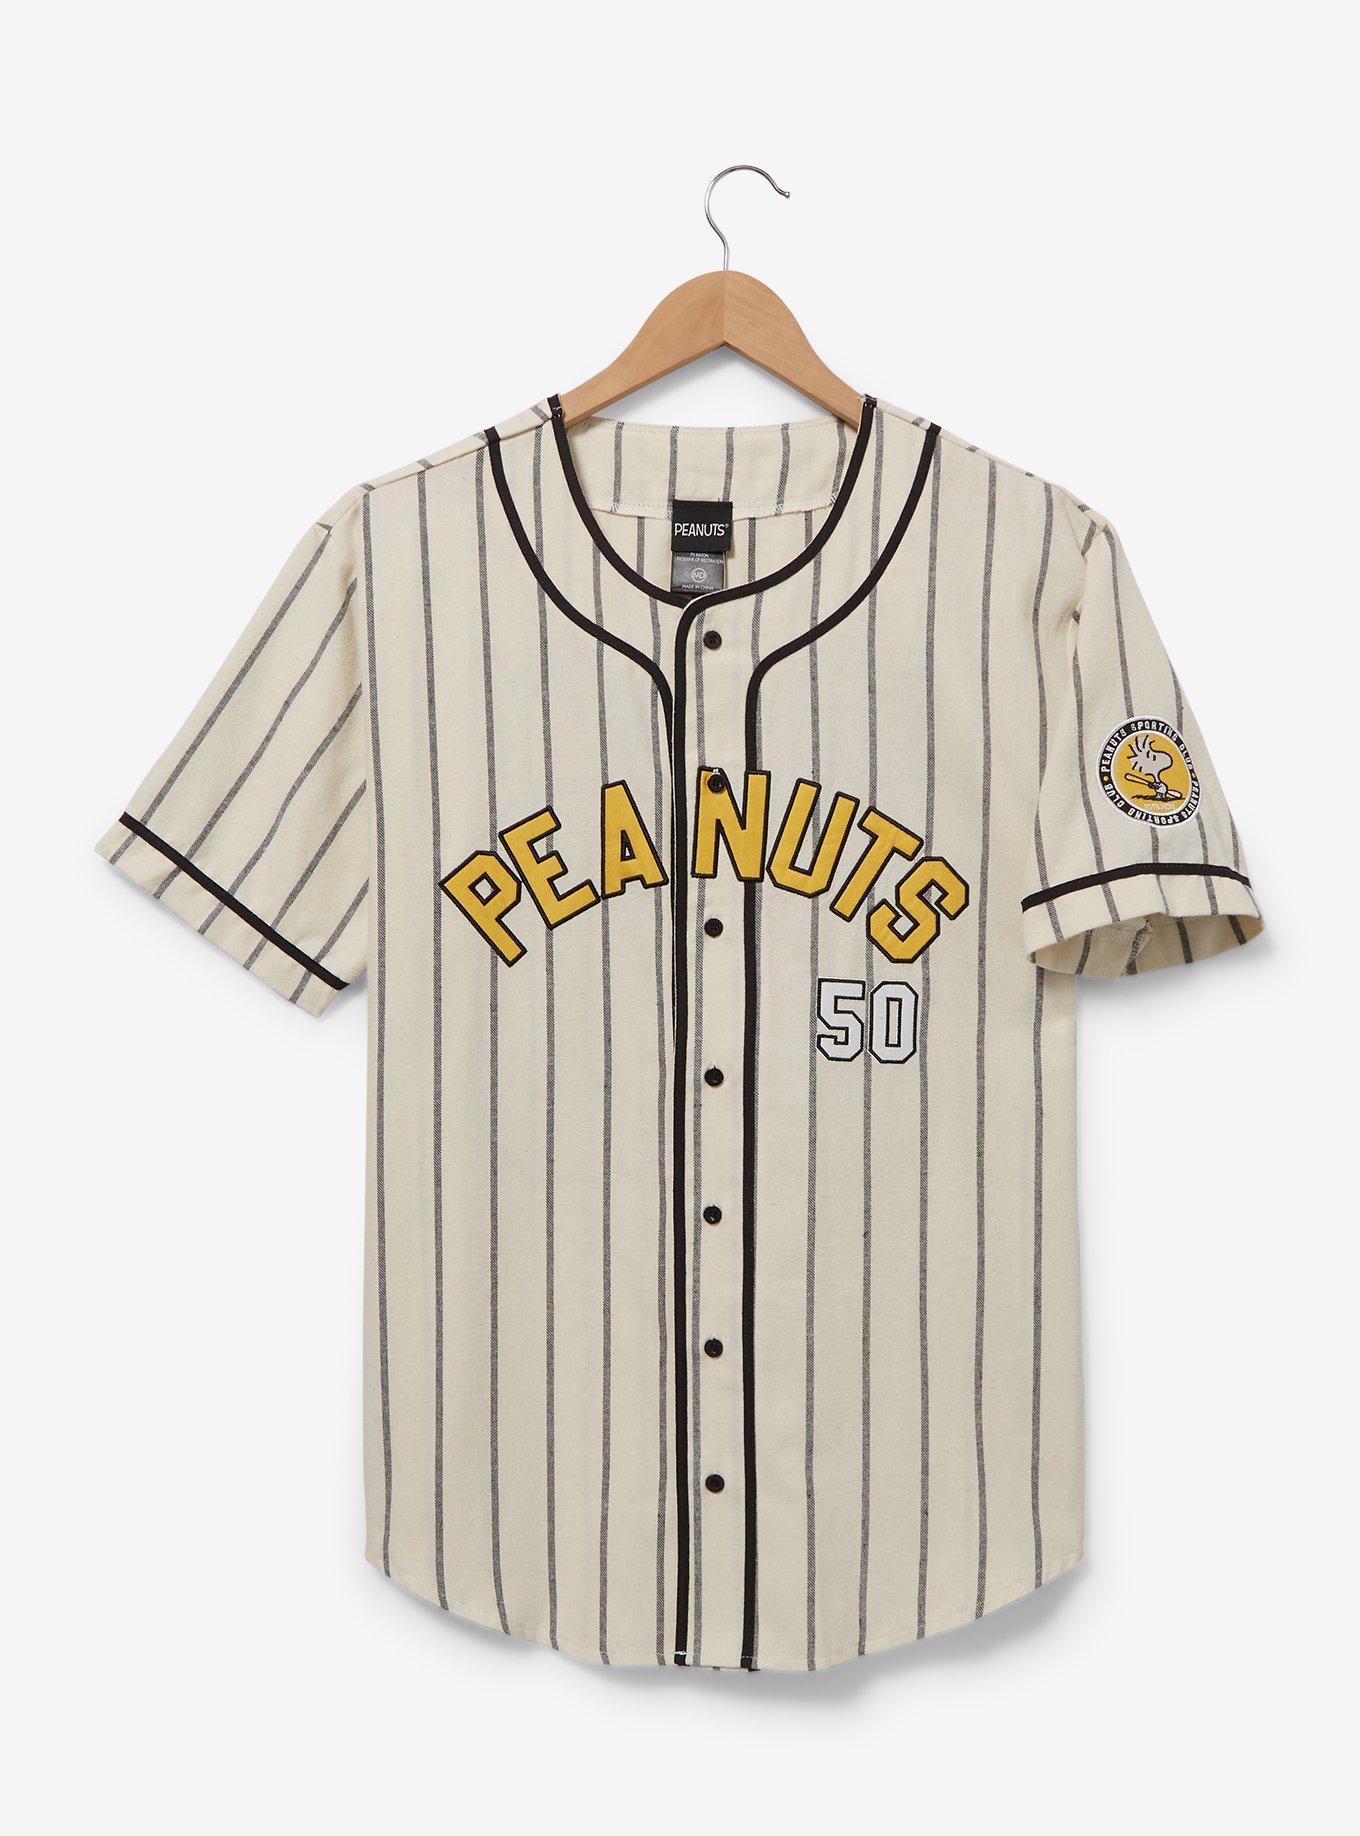 Peanuts Snoopy and Woodstock Striped Baseball Jersey